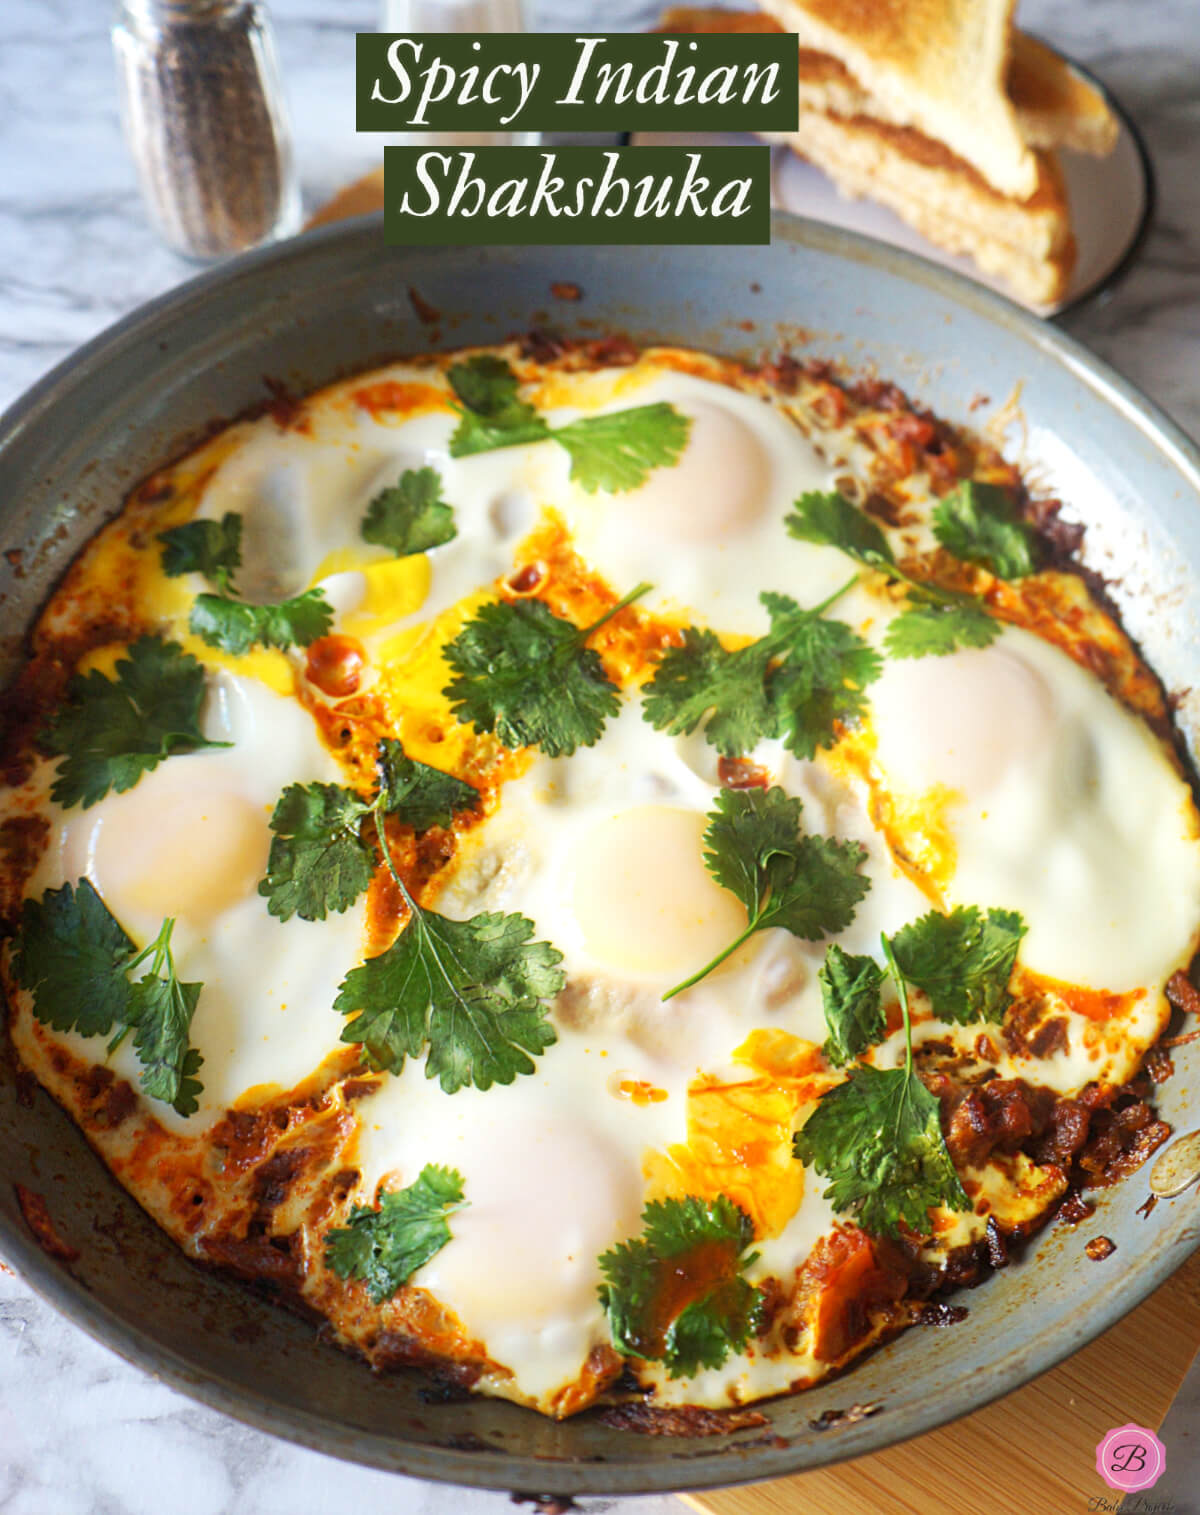 Spicy Indian Shakshuka cooked in a non-stick pan